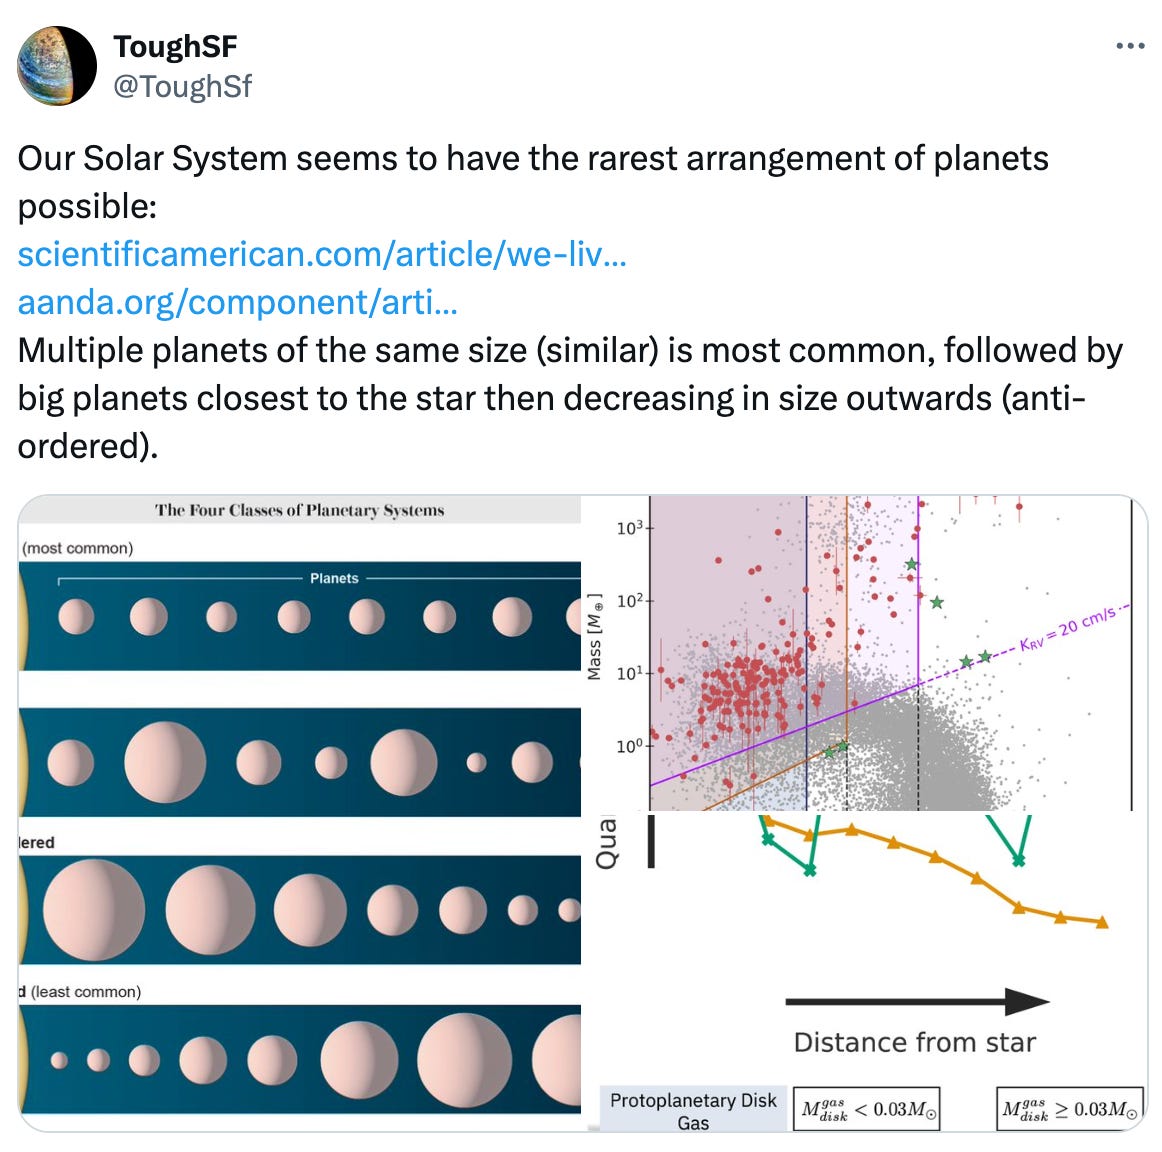  ToughSF @ToughSf Our Solar System seems to have the rarest arrangement of planets possible: https://scientificamerican.com/article/we-live-in-the-rarest-type-of-planetary-system1/ https://aanda.org/component/article?access=doi&doi=10.1051/0004-6361/202243751 Multiple planets of the same size (similar) is most common, followed by big planets closest to the star then decreasing in size outwards (anti-ordered).